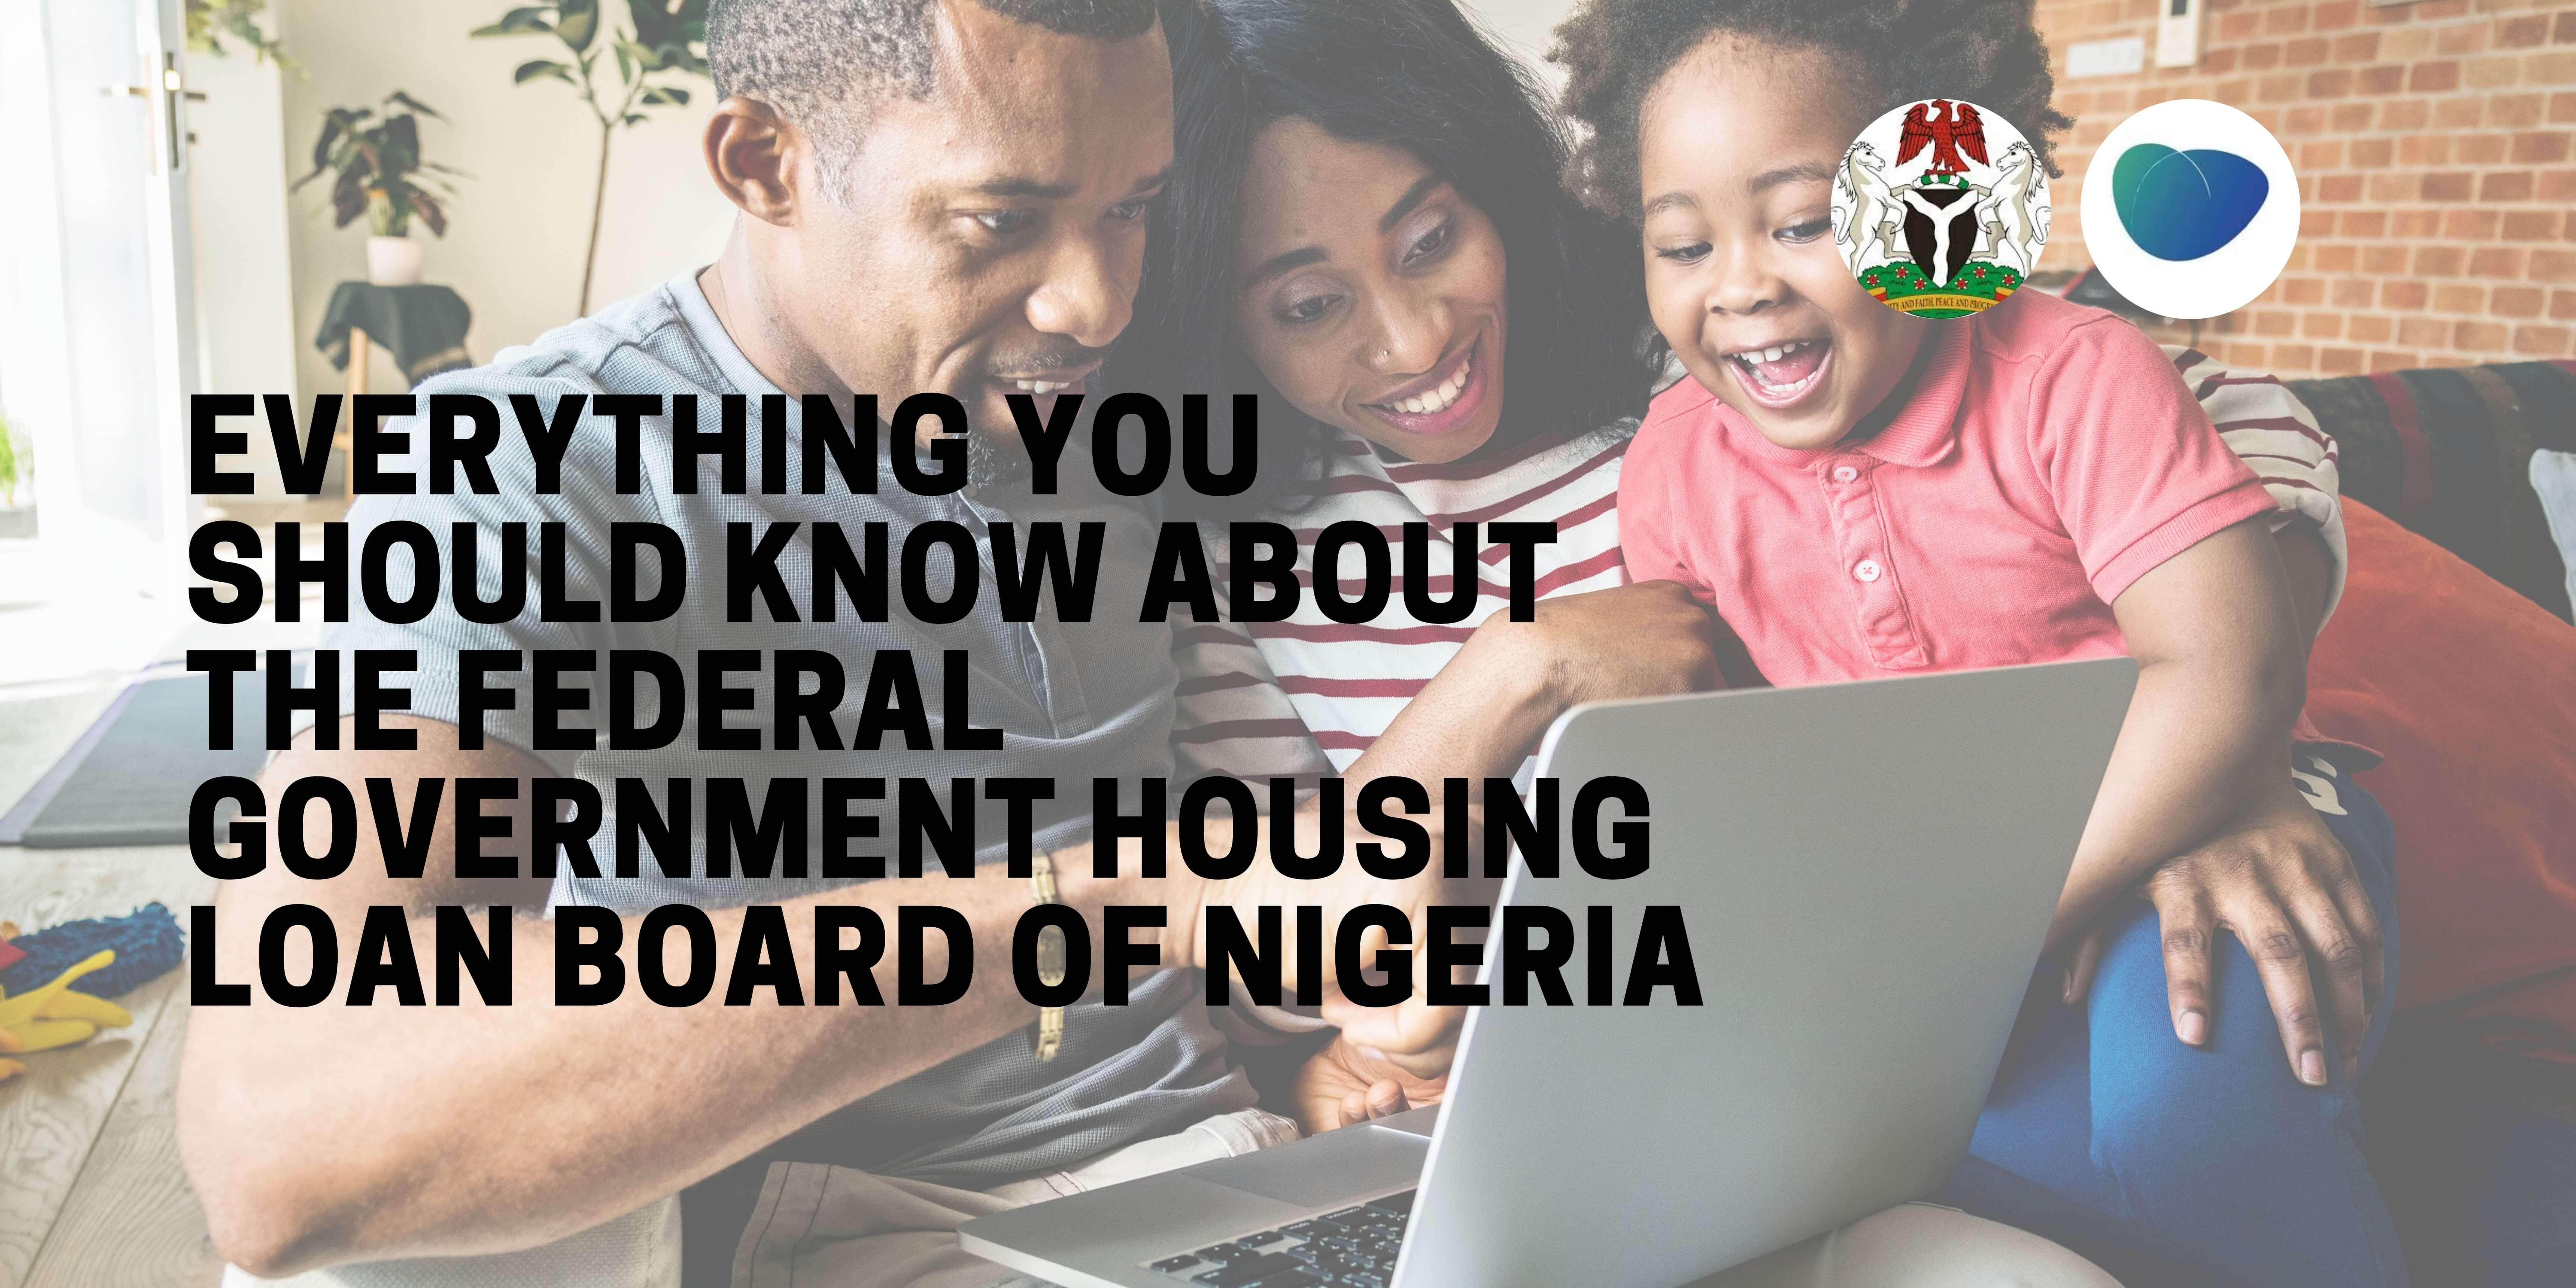 federal government housing loan board